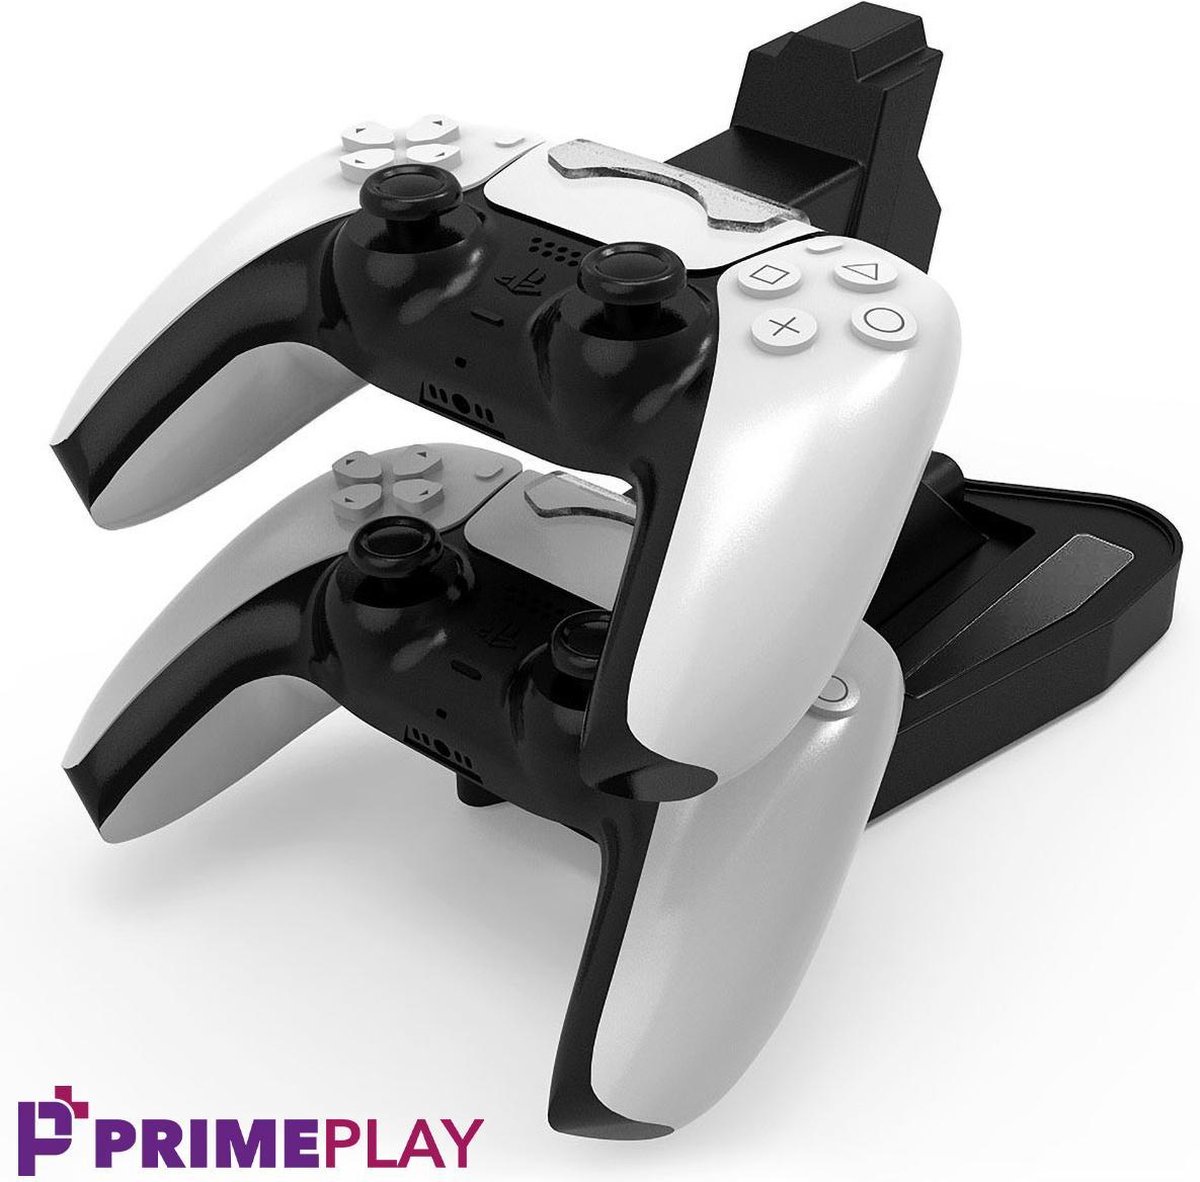 PrimePlay - ps5 accessoires - ps5 oplaadstation - Dualsense charging station - Docking station - Playstation 5 controller charger - Zwart